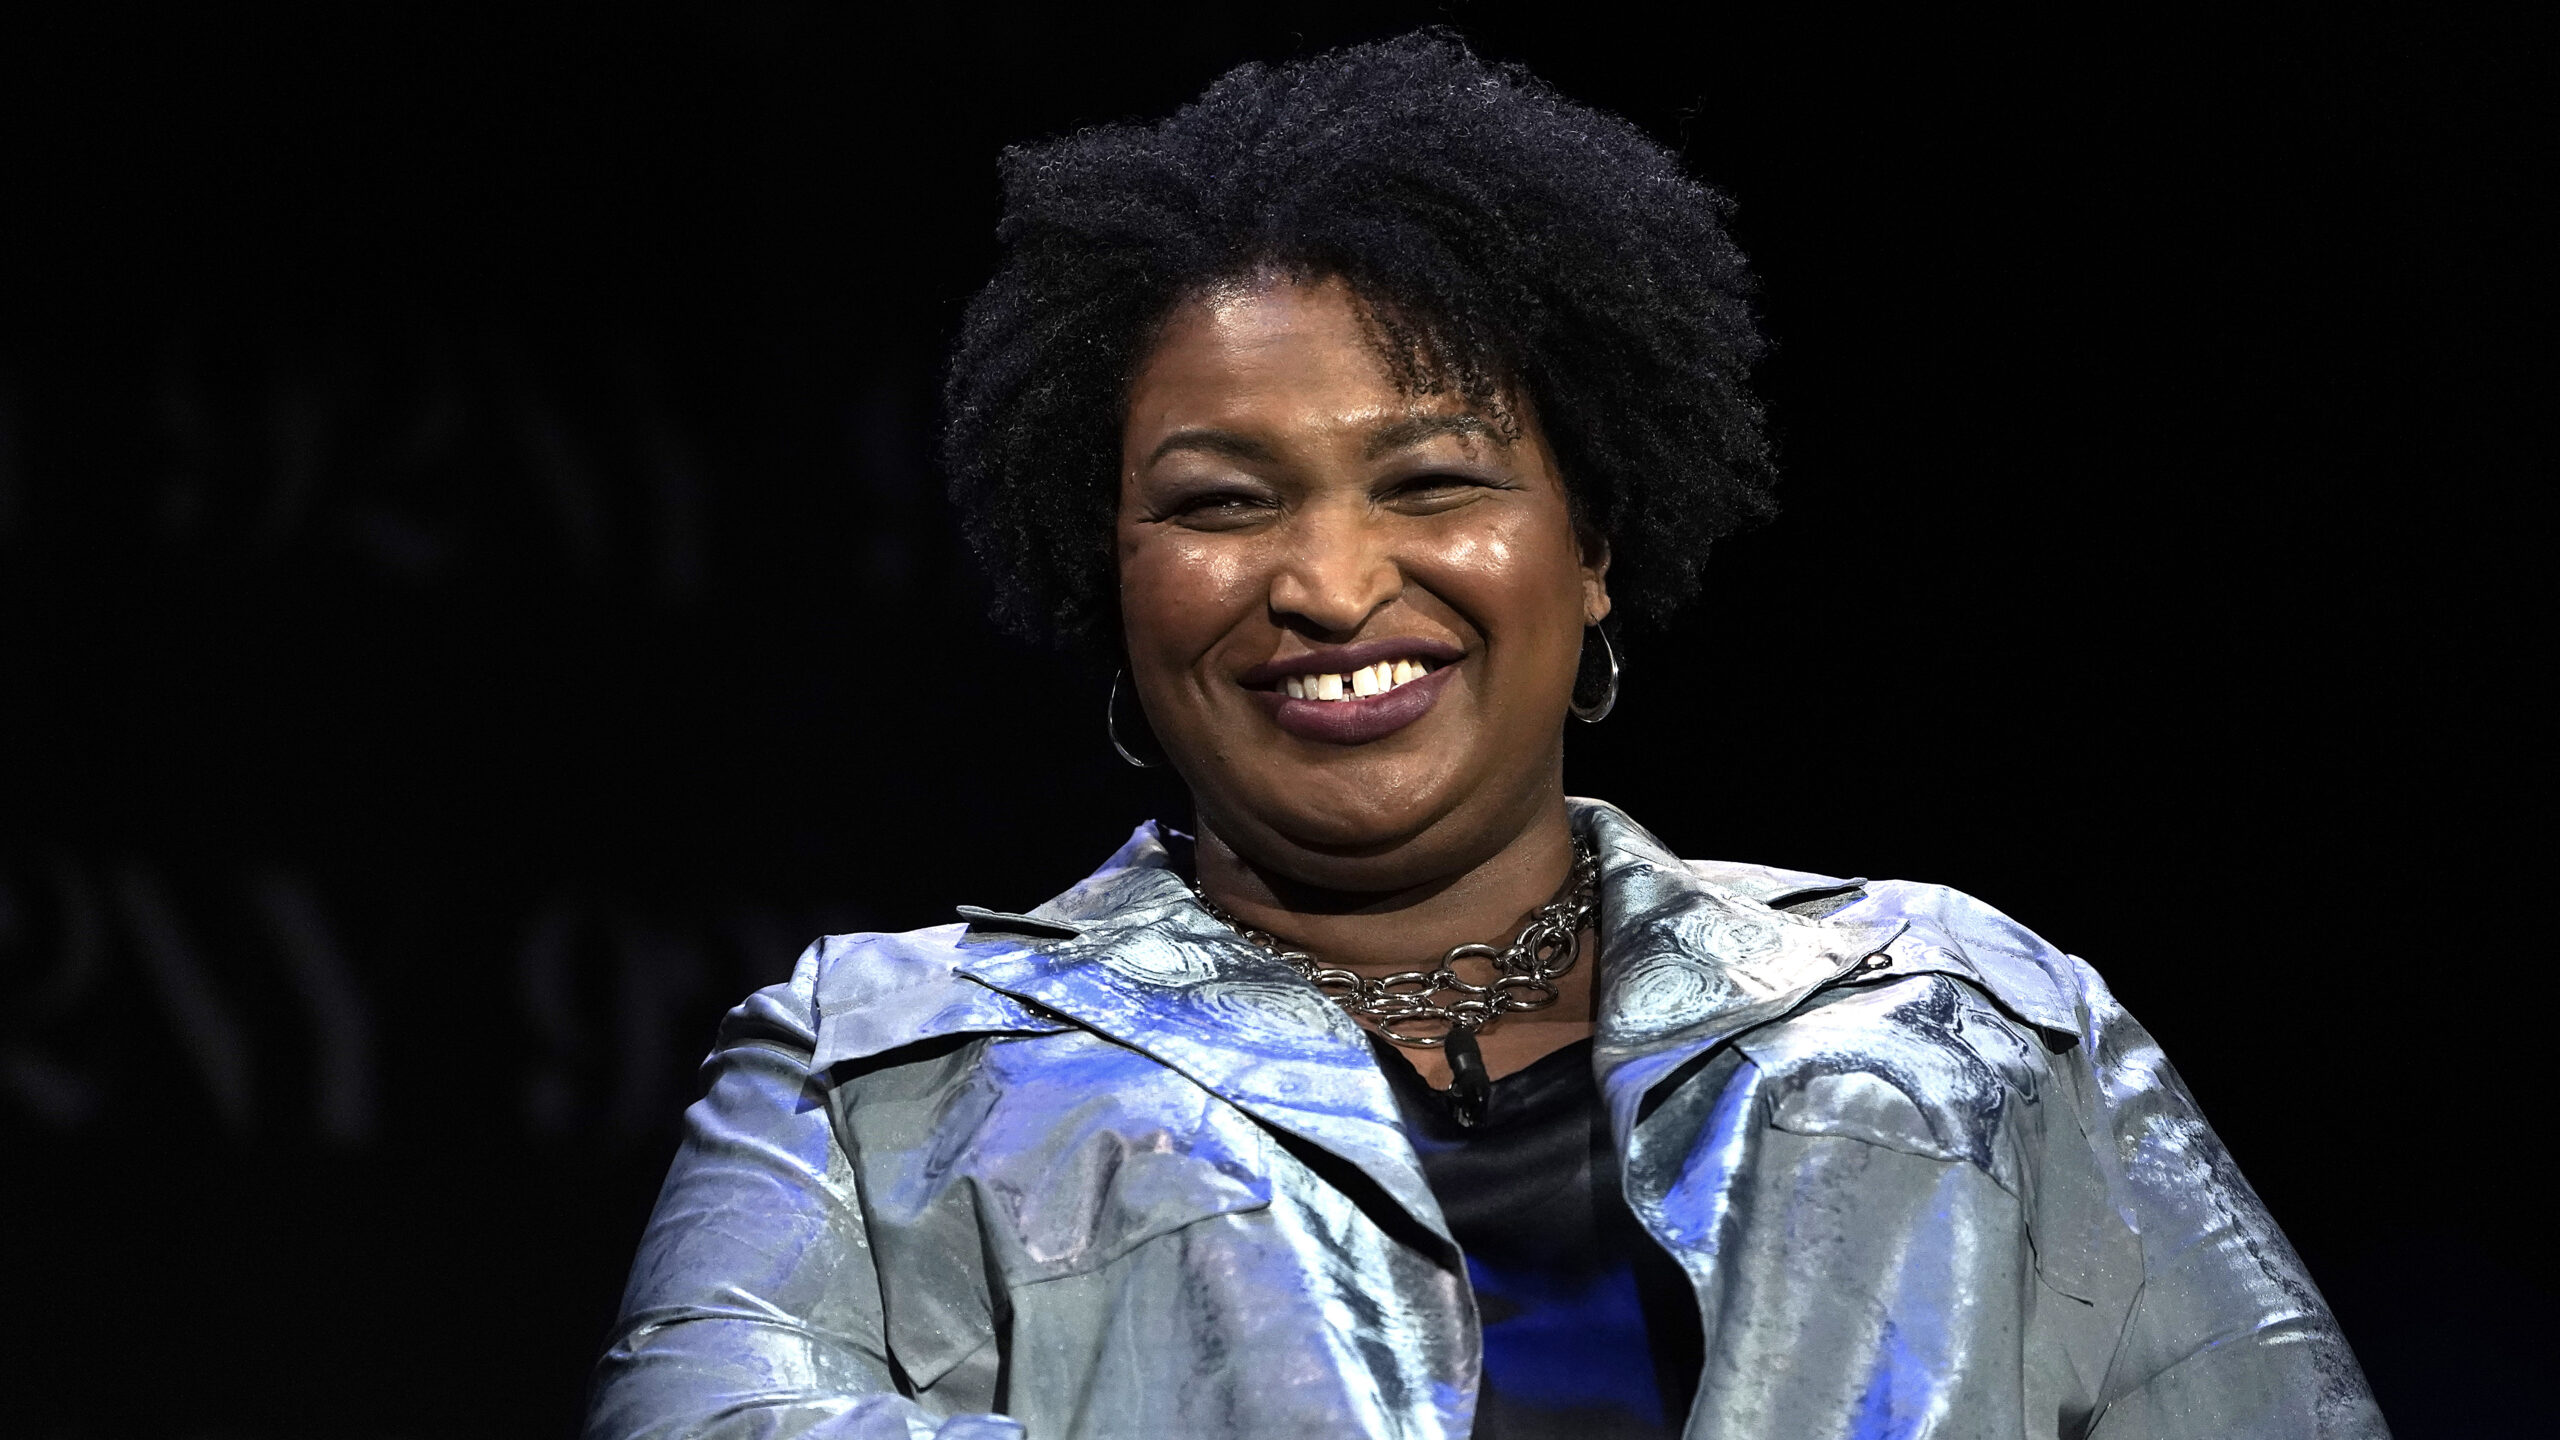 Stacey Abrams: Criticizing DEI undermines democracy, education, and the economy